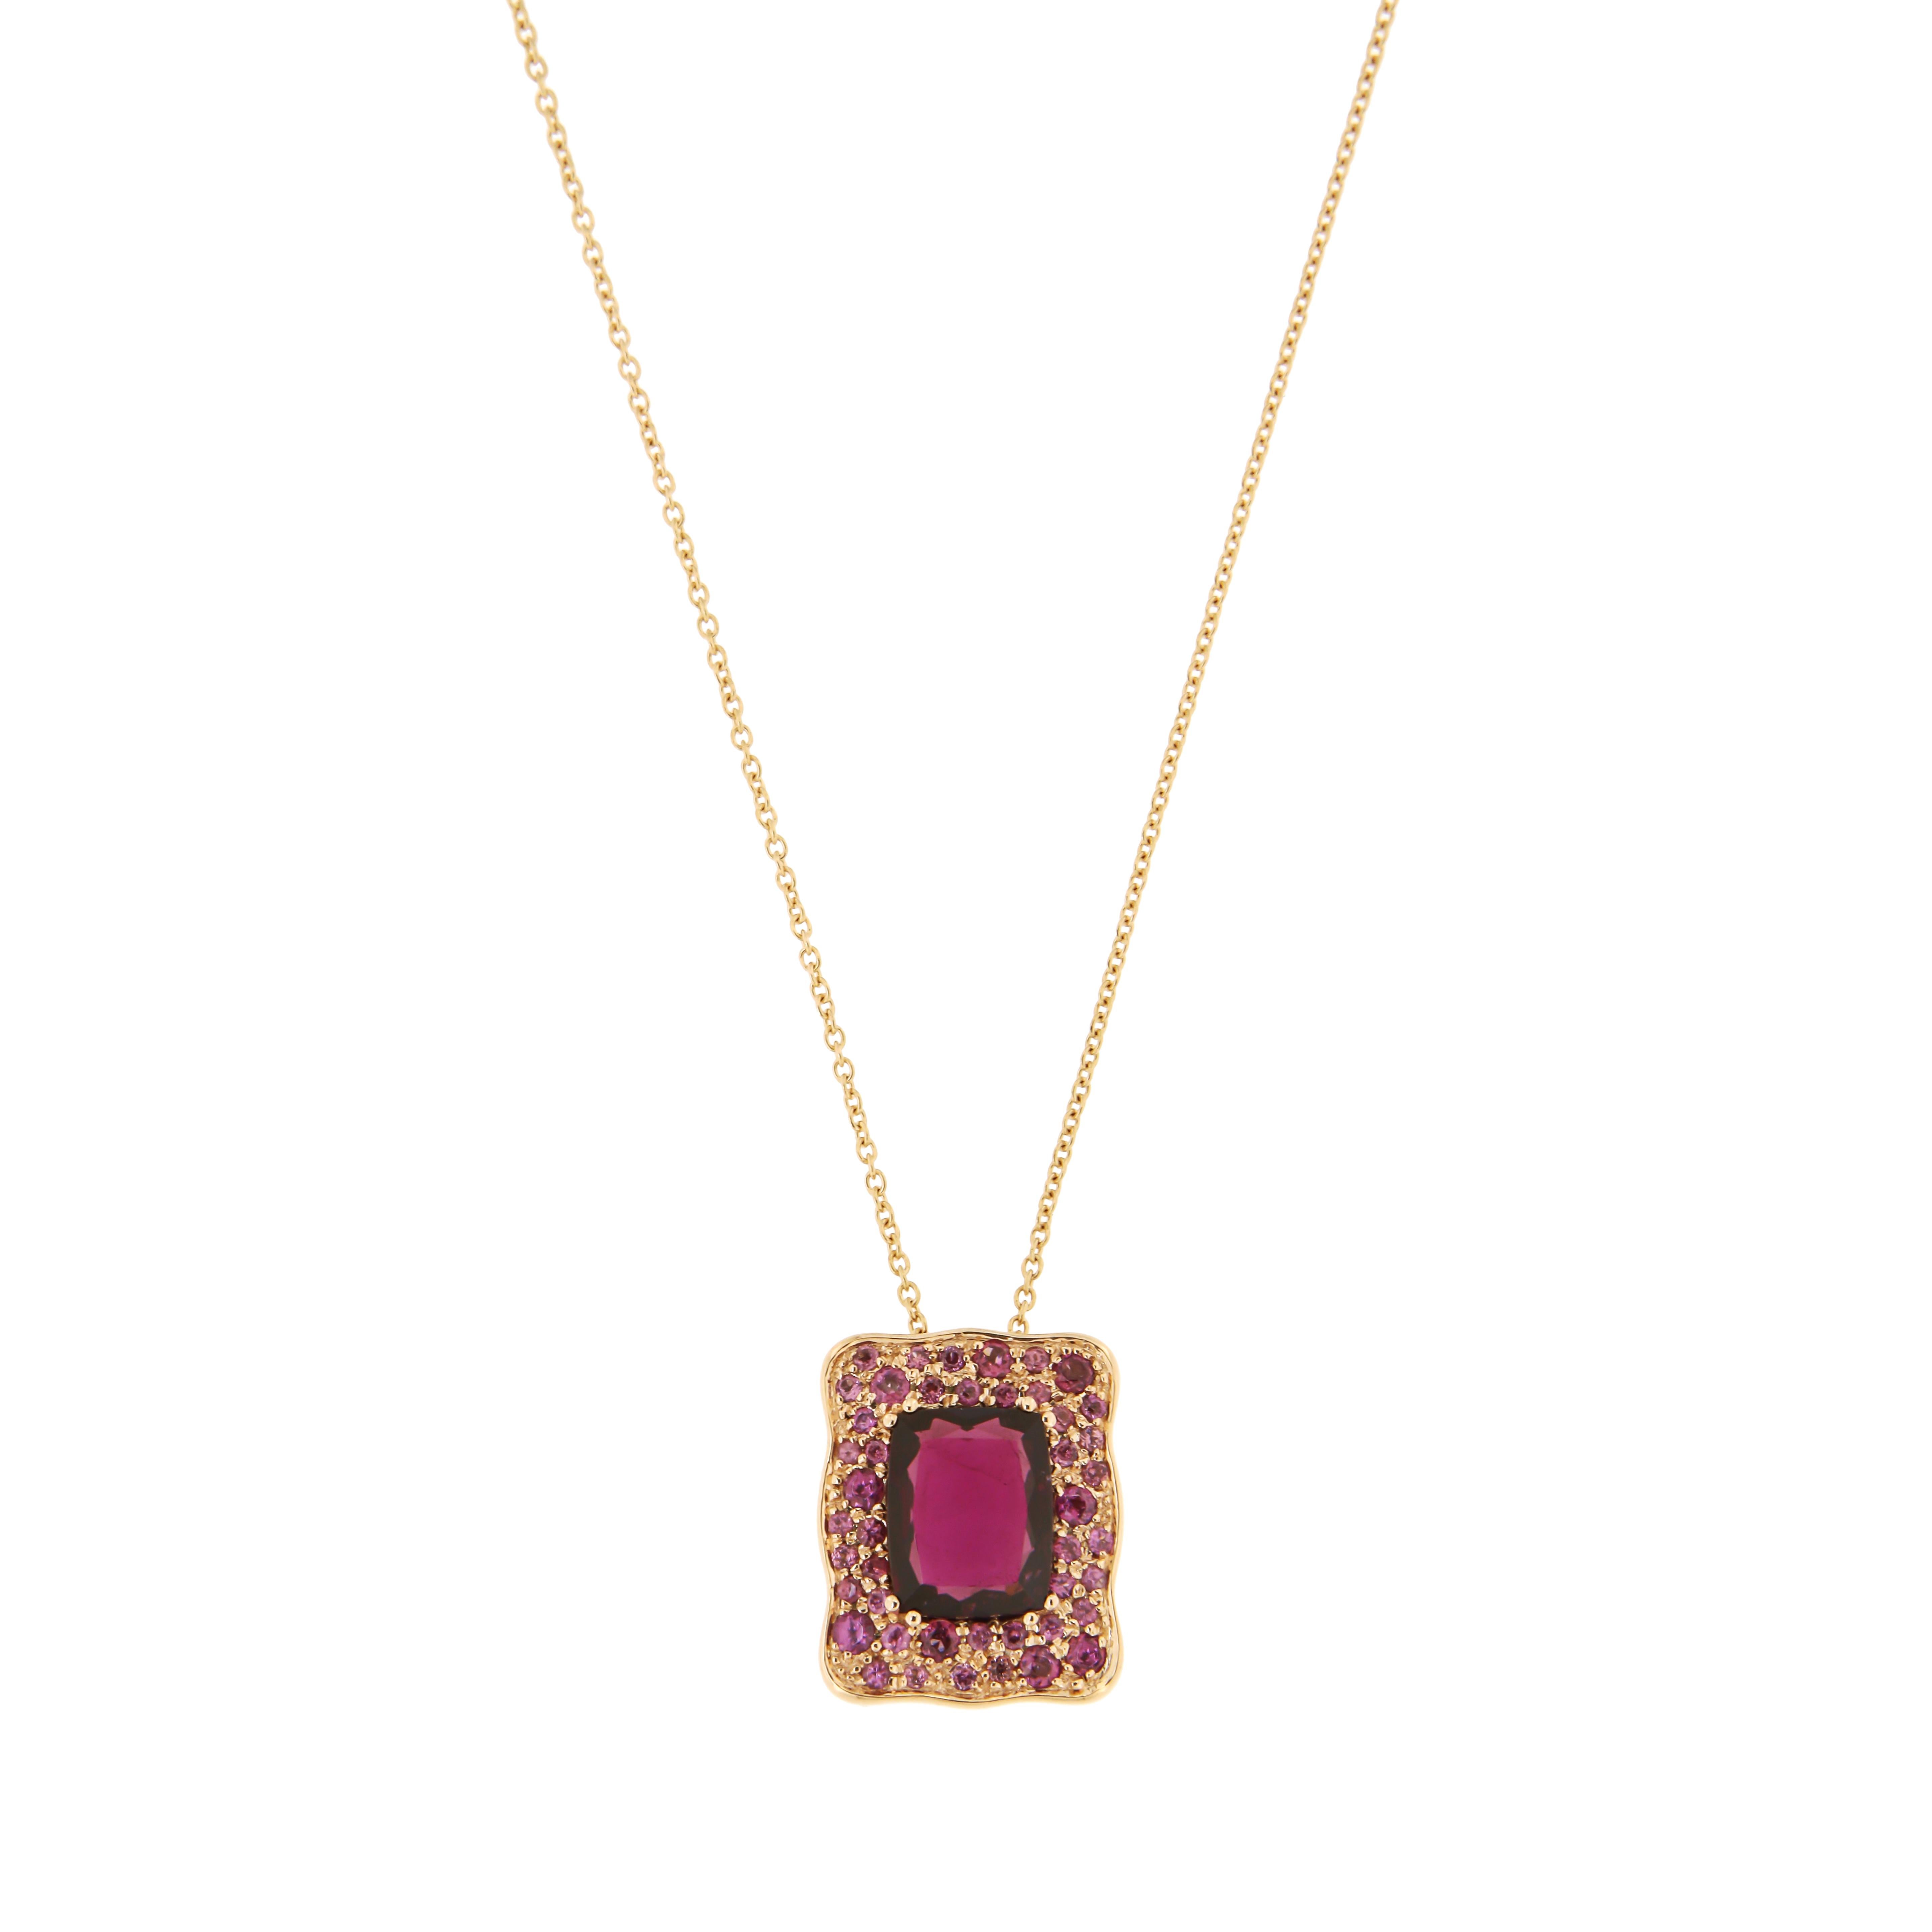 Ring Rose Gold 18 K (Matching Earrings and Necklace Available)
Rhodolite

Weight 6.9 grams
Different Sizes Available 

With a heritage of ancient fine Swiss jewelry traditions, NATKINA is a Geneva based jewellery brand, which creates modern